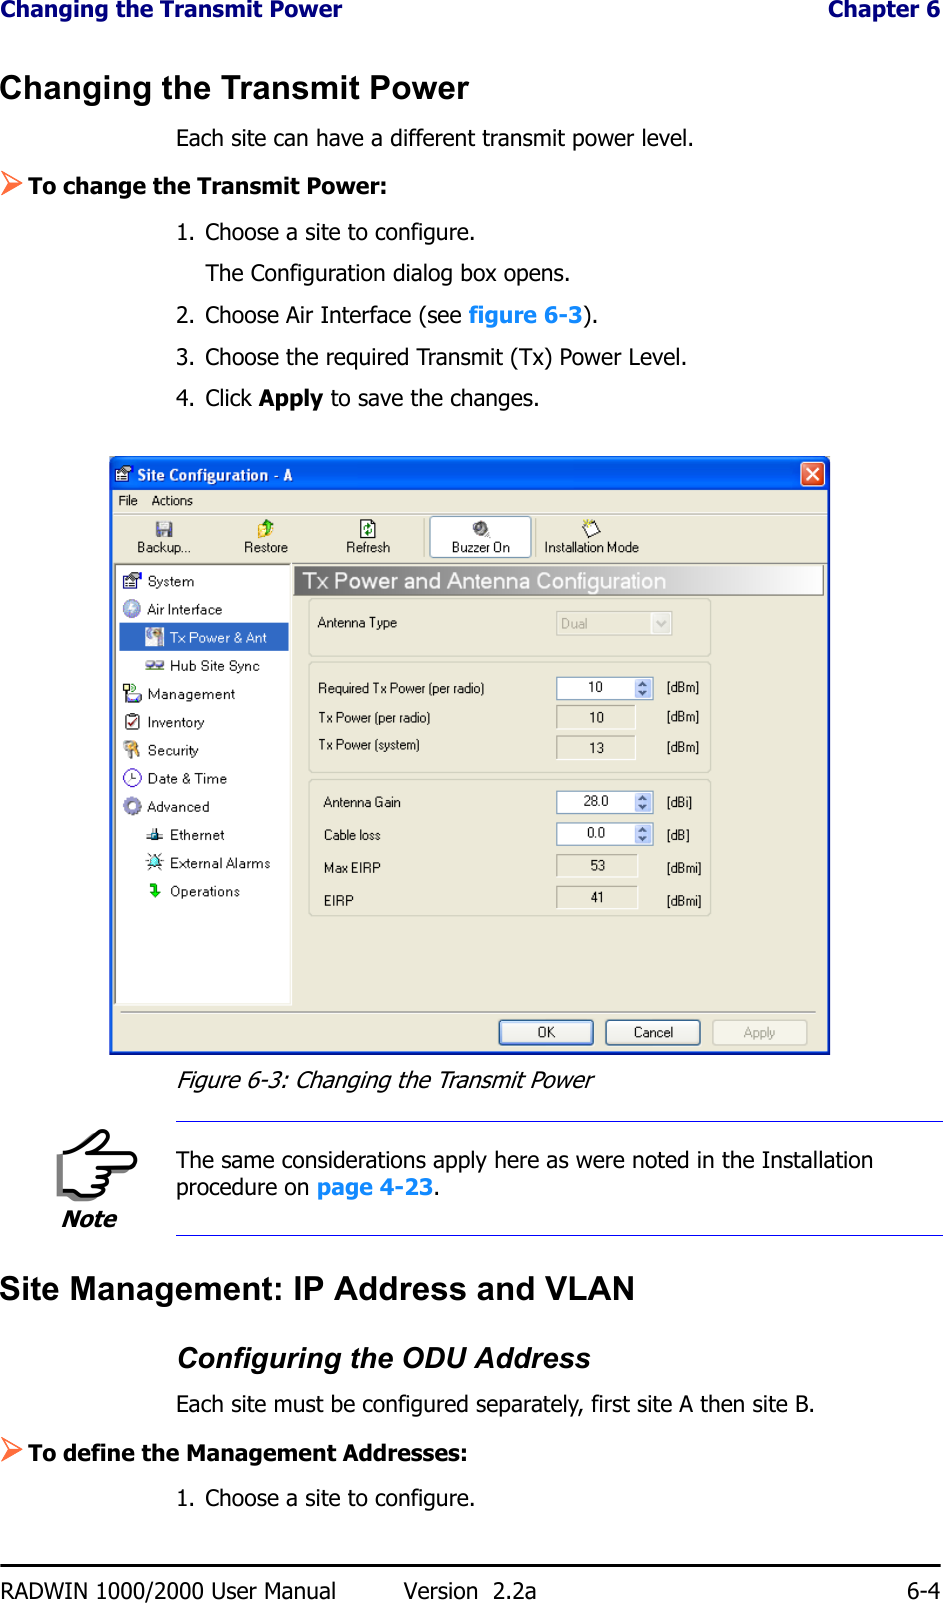 Changing the Transmit Power  Chapter 6RADWIN 1000/2000 User Manual Version  2.2a 6-4Changing the Transmit PowerEach site can have a different transmit power level. ¾To change the Transmit Power:1. Choose a site to configure.The Configuration dialog box opens.2. Choose Air Interface (see figure 6-3).3. Choose the required Transmit (Tx) Power Level.4. Click Apply to save the changes.Figure 6-3: Changing the Transmit PowerSite Management: IP Address and VLANConfiguring the ODU AddressEach site must be configured separately, first site A then site B.¾To define the Management Addresses:1. Choose a site to configure.NoteThe same considerations apply here as were noted in the Installation procedure on page 4-23.